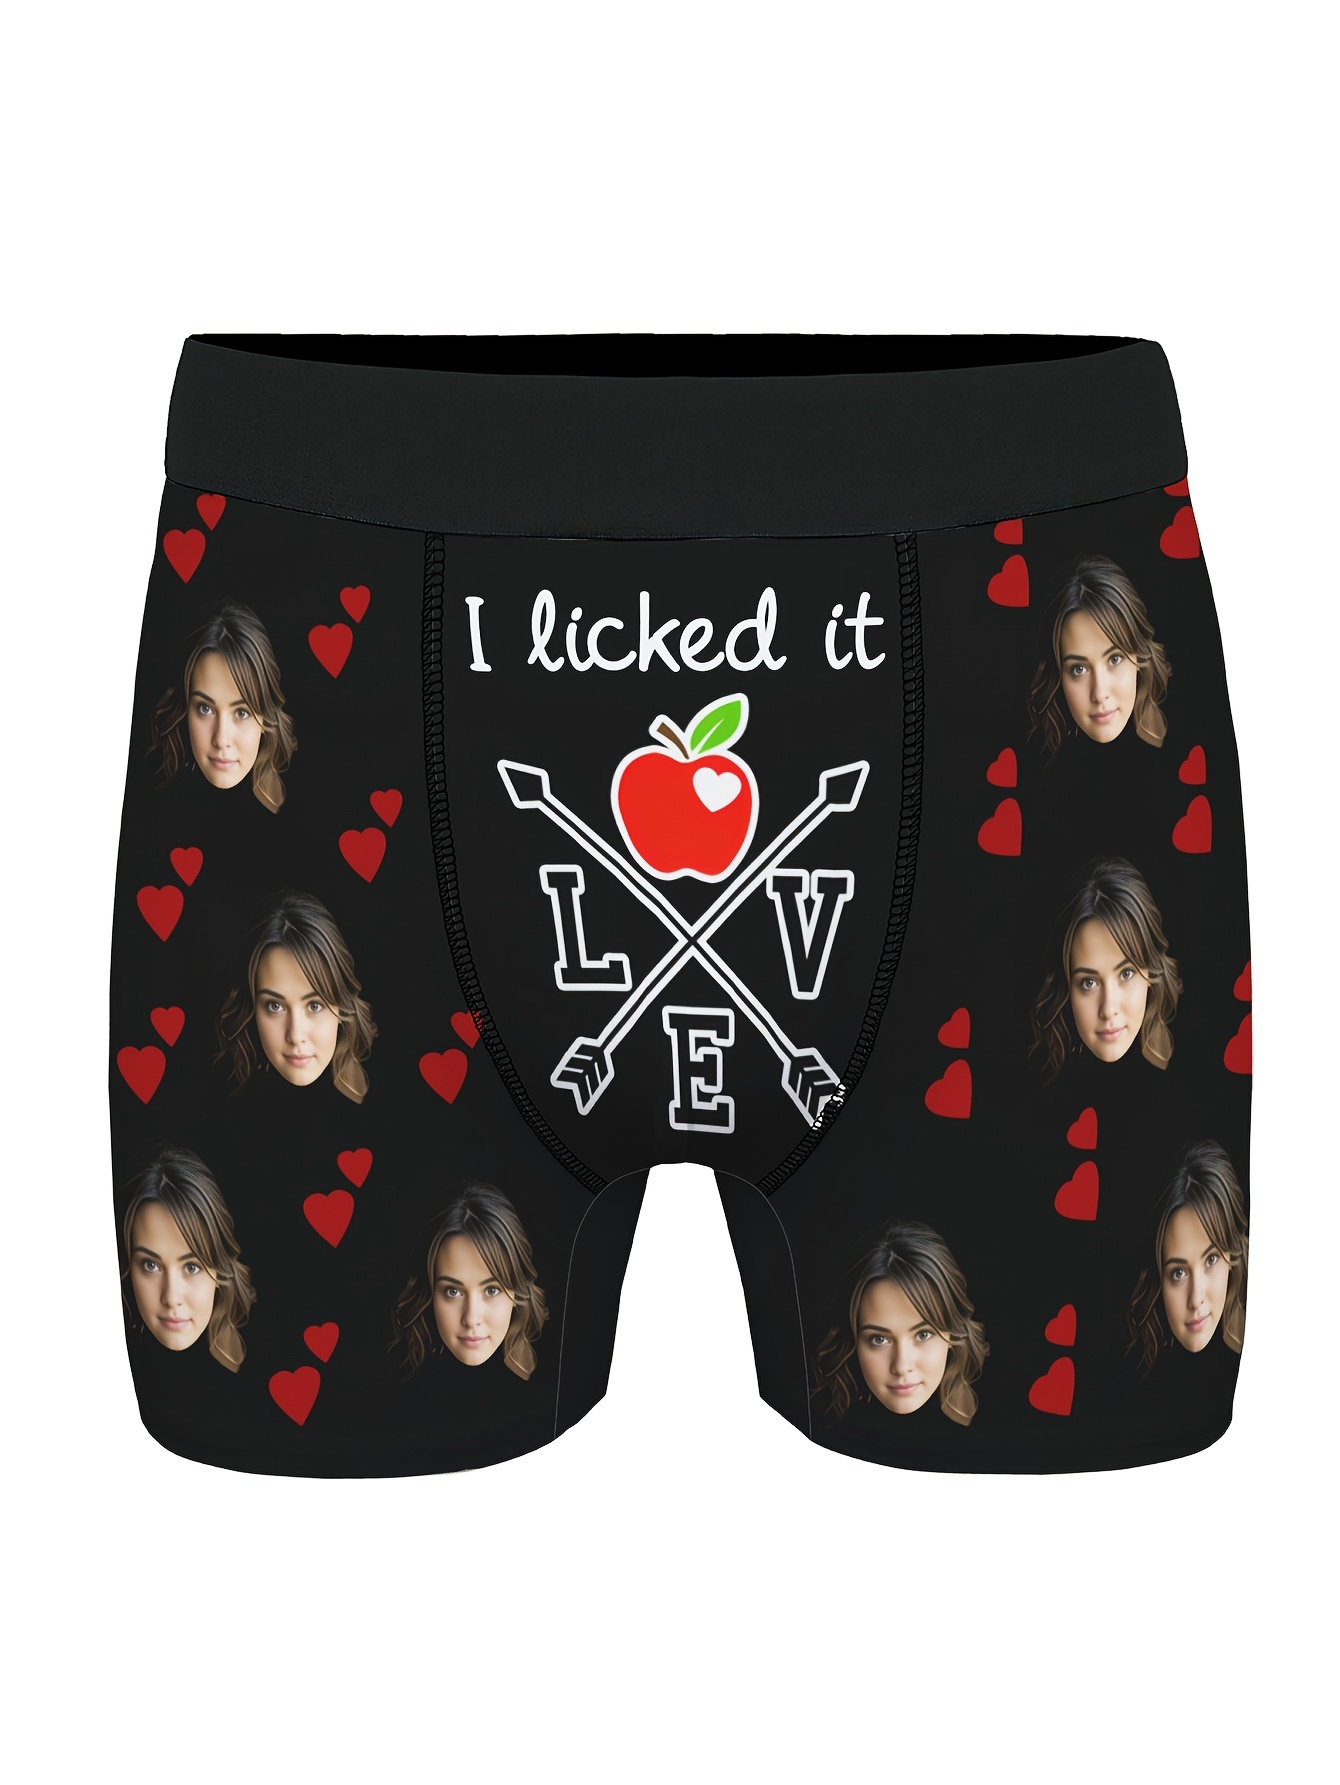 Personalized Face Boxer, Custom Photo Printed Face Underwear Black Heart I  Licked It Novelty Boxer Briefs Shorts Underpants for Men Boyfriend Wedding